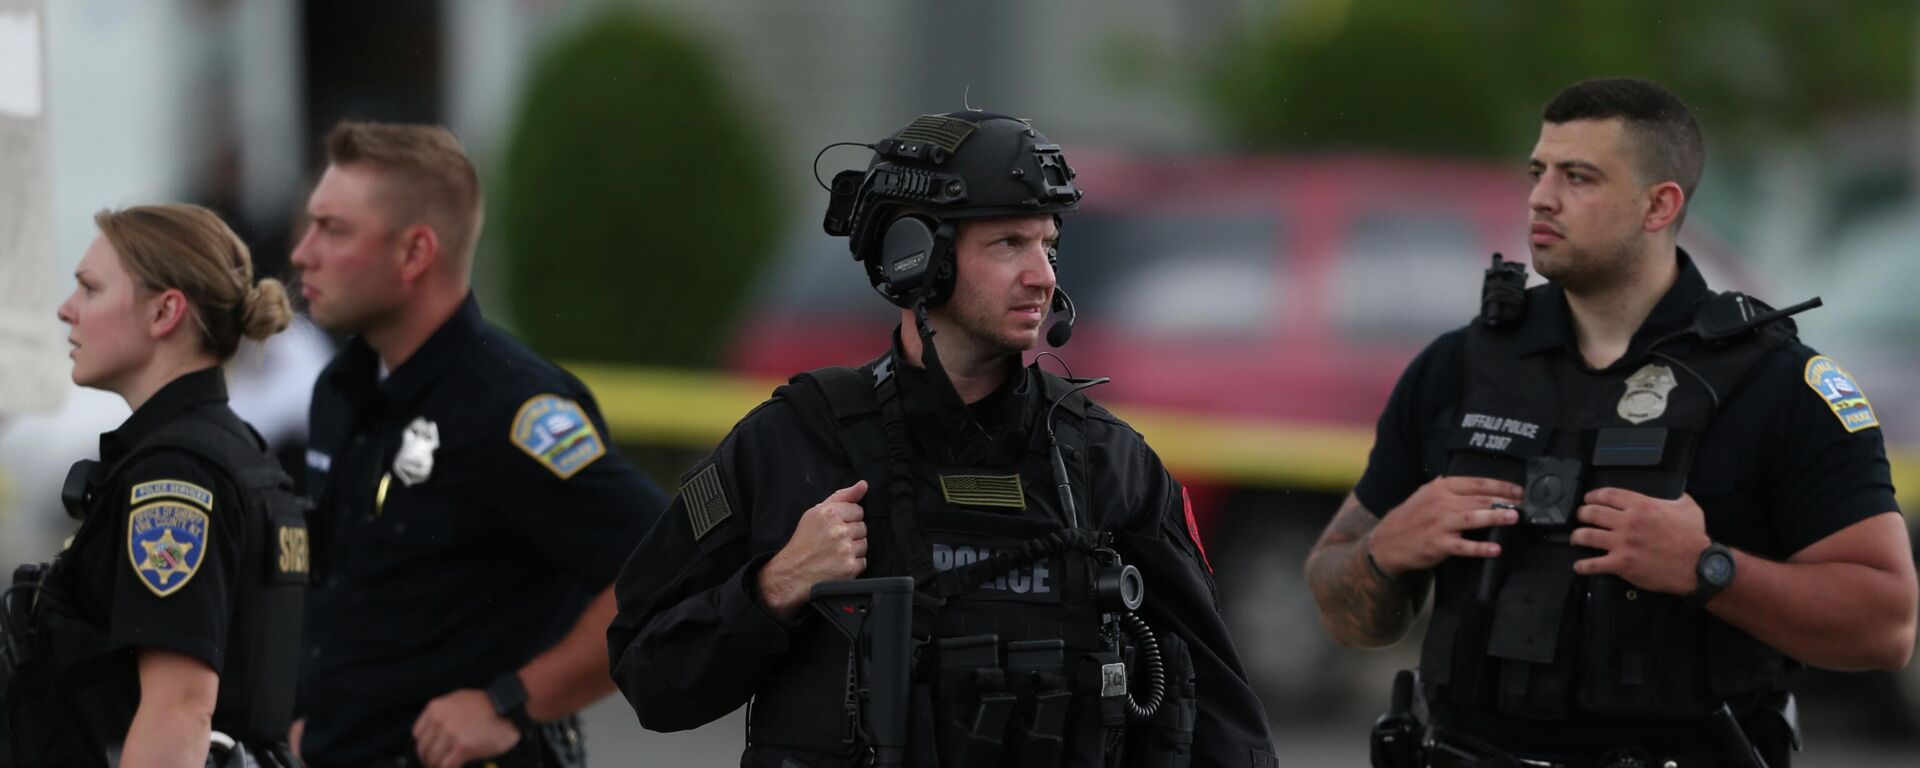 Police walk along the perimeter of the scene after a shooting at a supermarket on Saturday, May 14, 2022, in Buffalo, N.Y.  Officials said the gunman entered the supermarket with a rifle and opened fire. Investigators believe the man may have been livestreaming the shooting and were looking into whether he had posted a manifesto online.  - Sputnik International, 1920, 23.05.2022